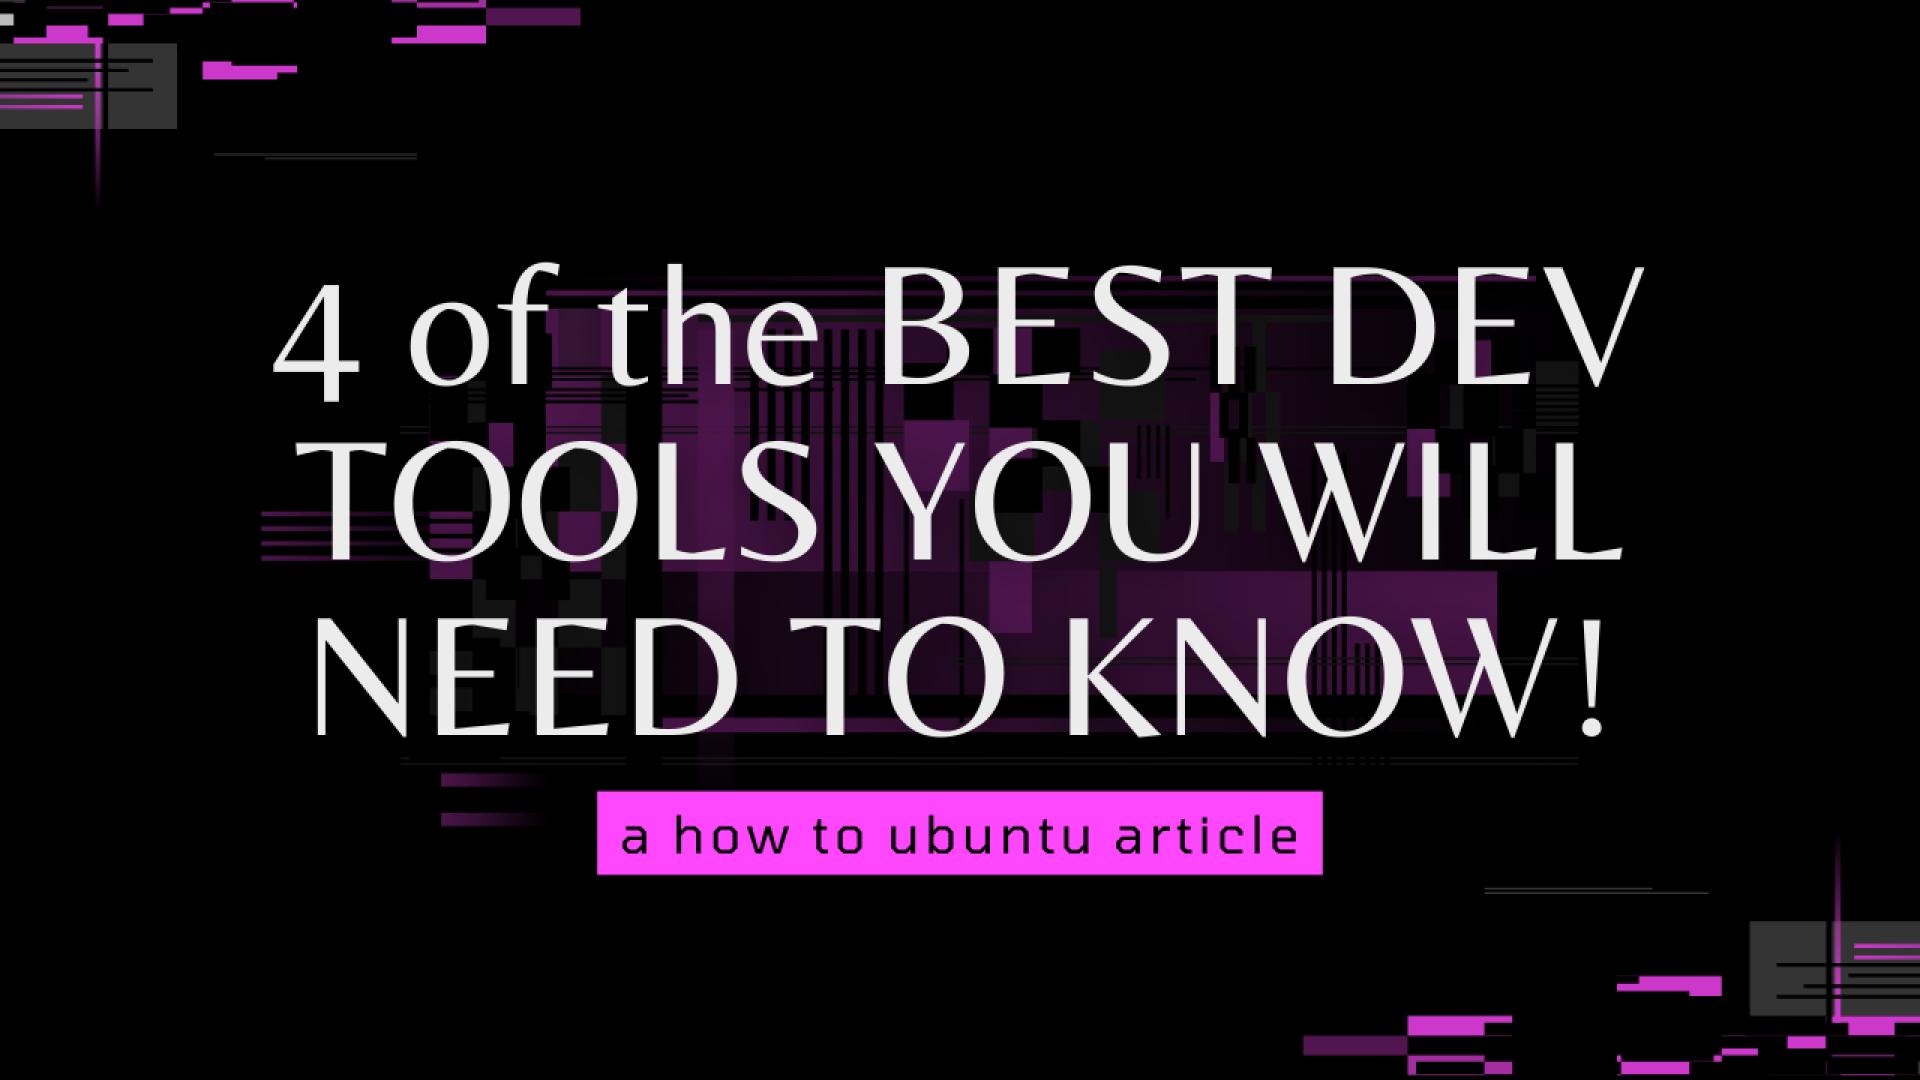 4 of the BEST DEV TOOLS YOU WILL NEED TO KNOW!